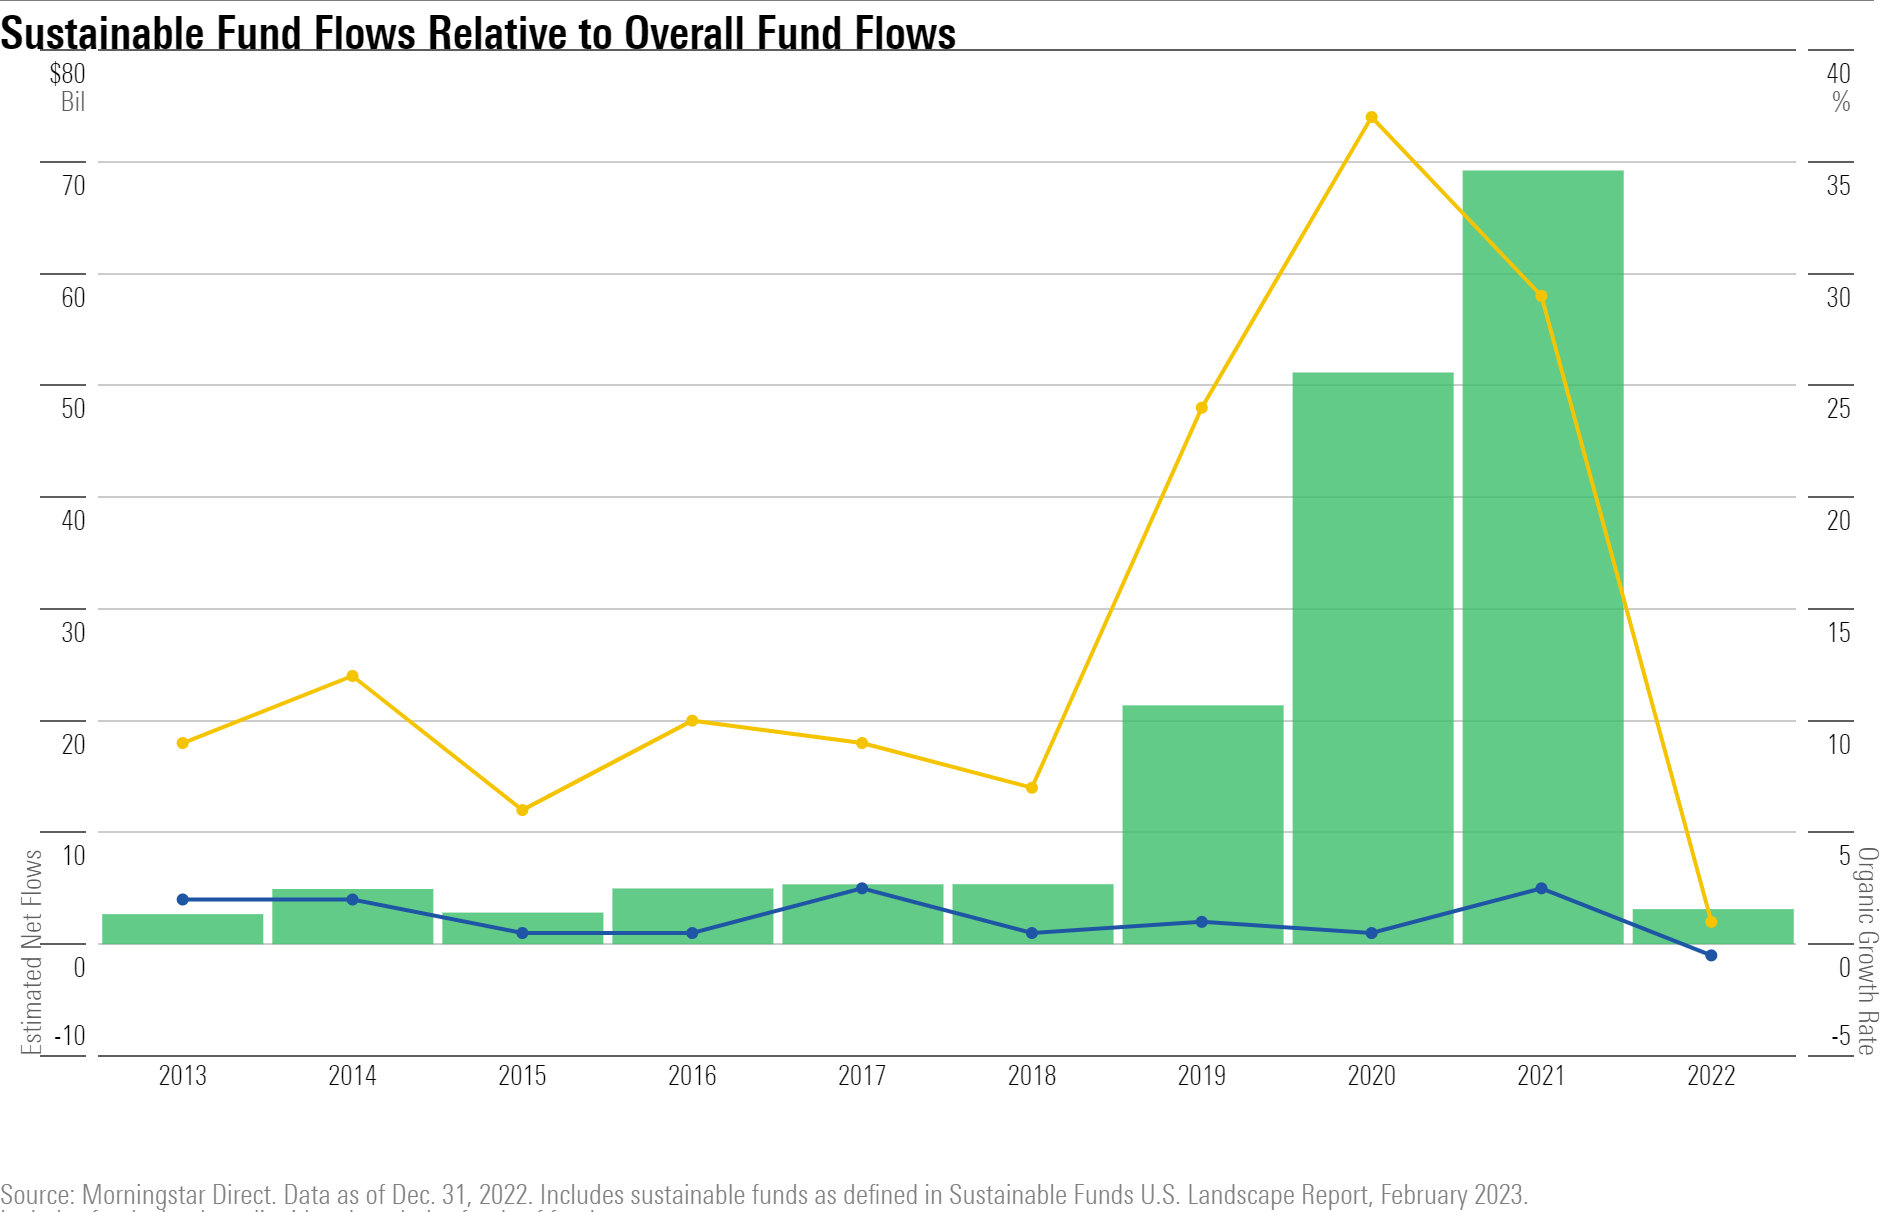 Bar and line chart showing sustainable fund flows as well as the organic growth rate for sustainable funds versus conventional peers.